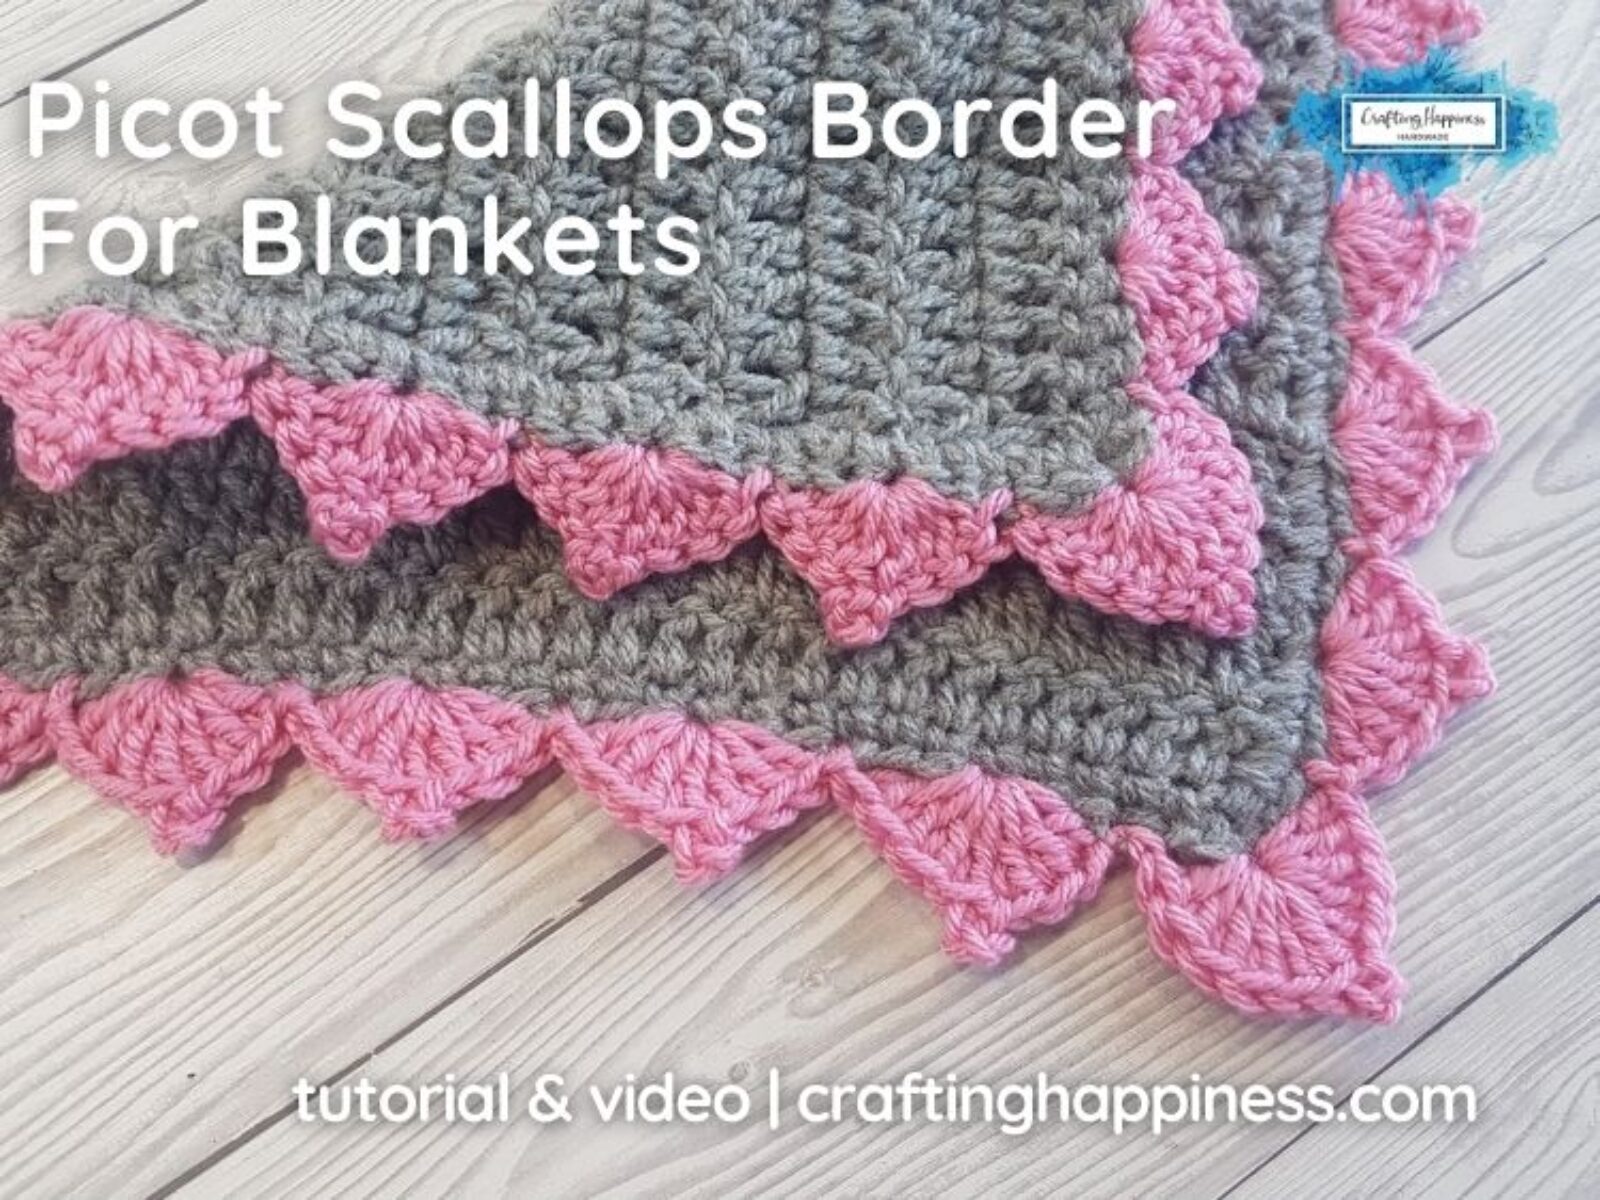 FB BLOG POSTER - Picot Scallops Border For Blankets _ Crafting Happiness